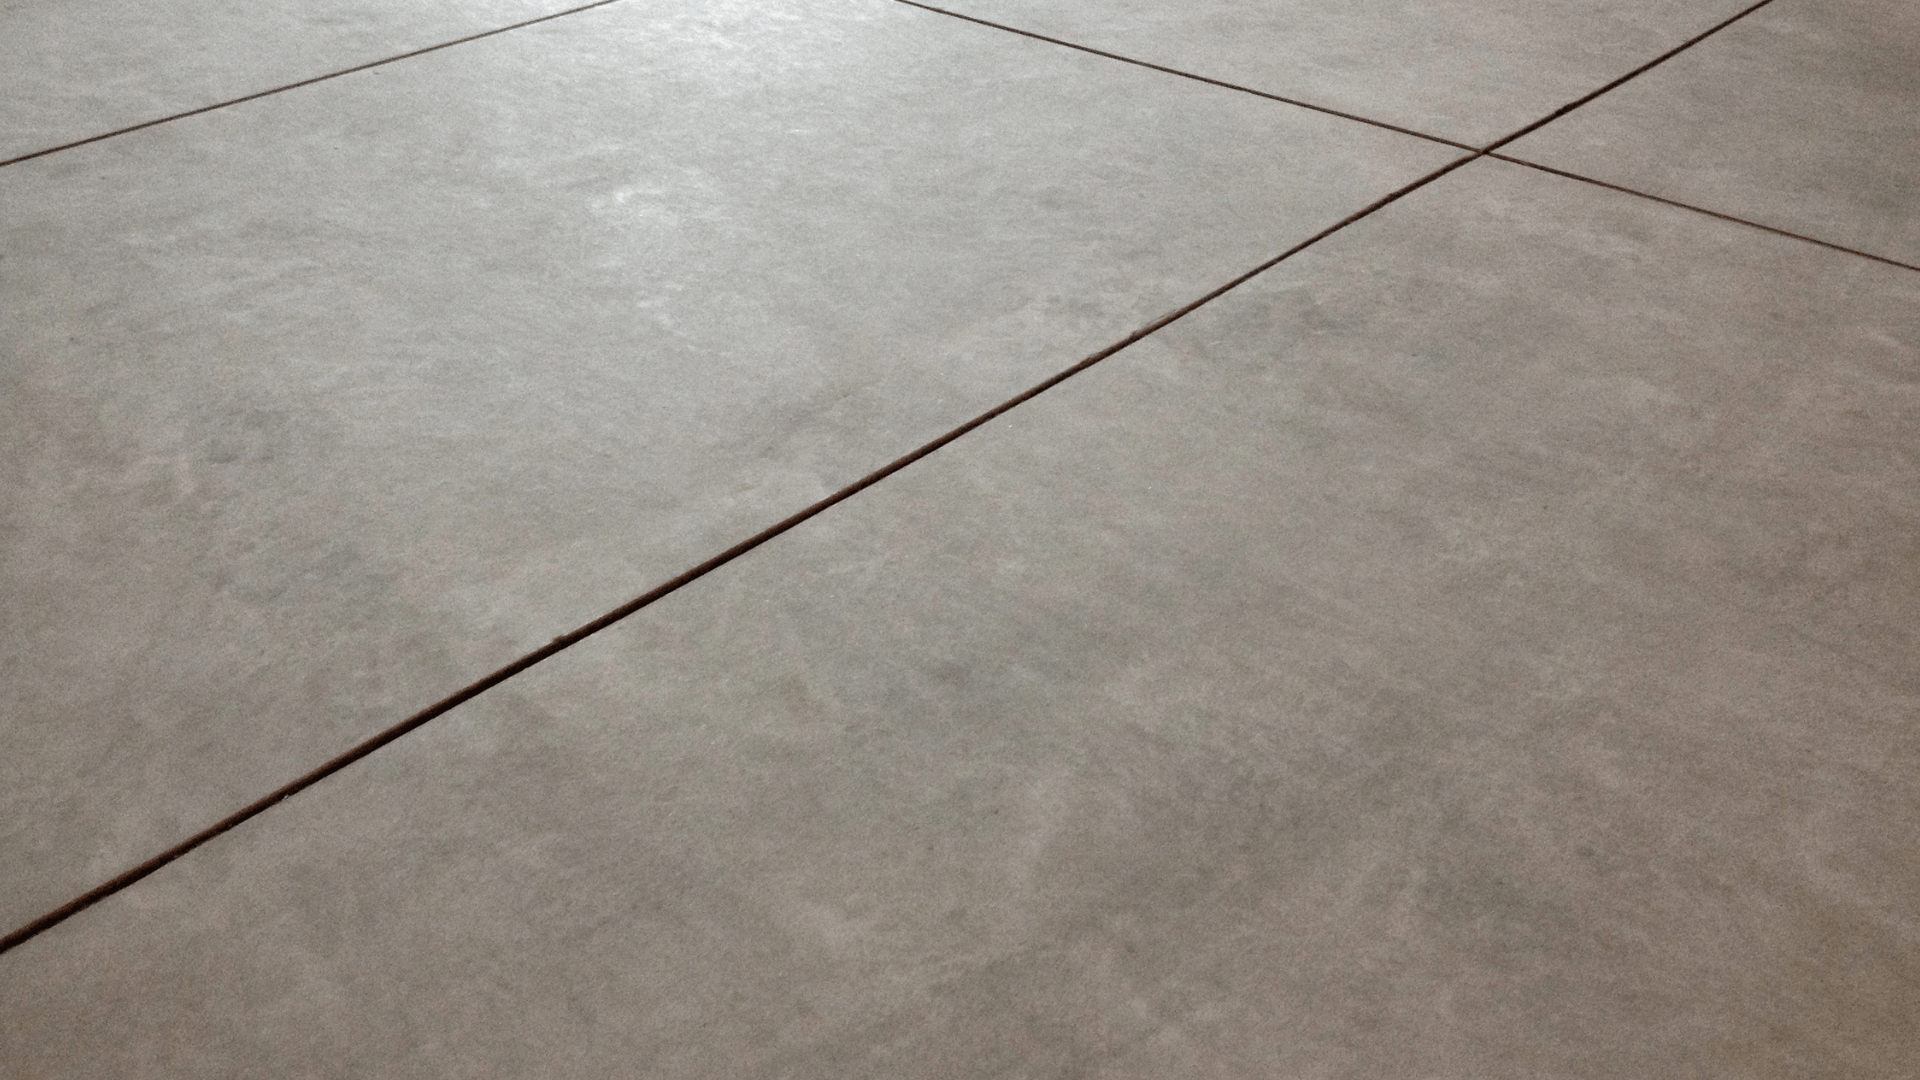 A concrete floor perfectly leveled with different concrete slabs that do not need concrete repair